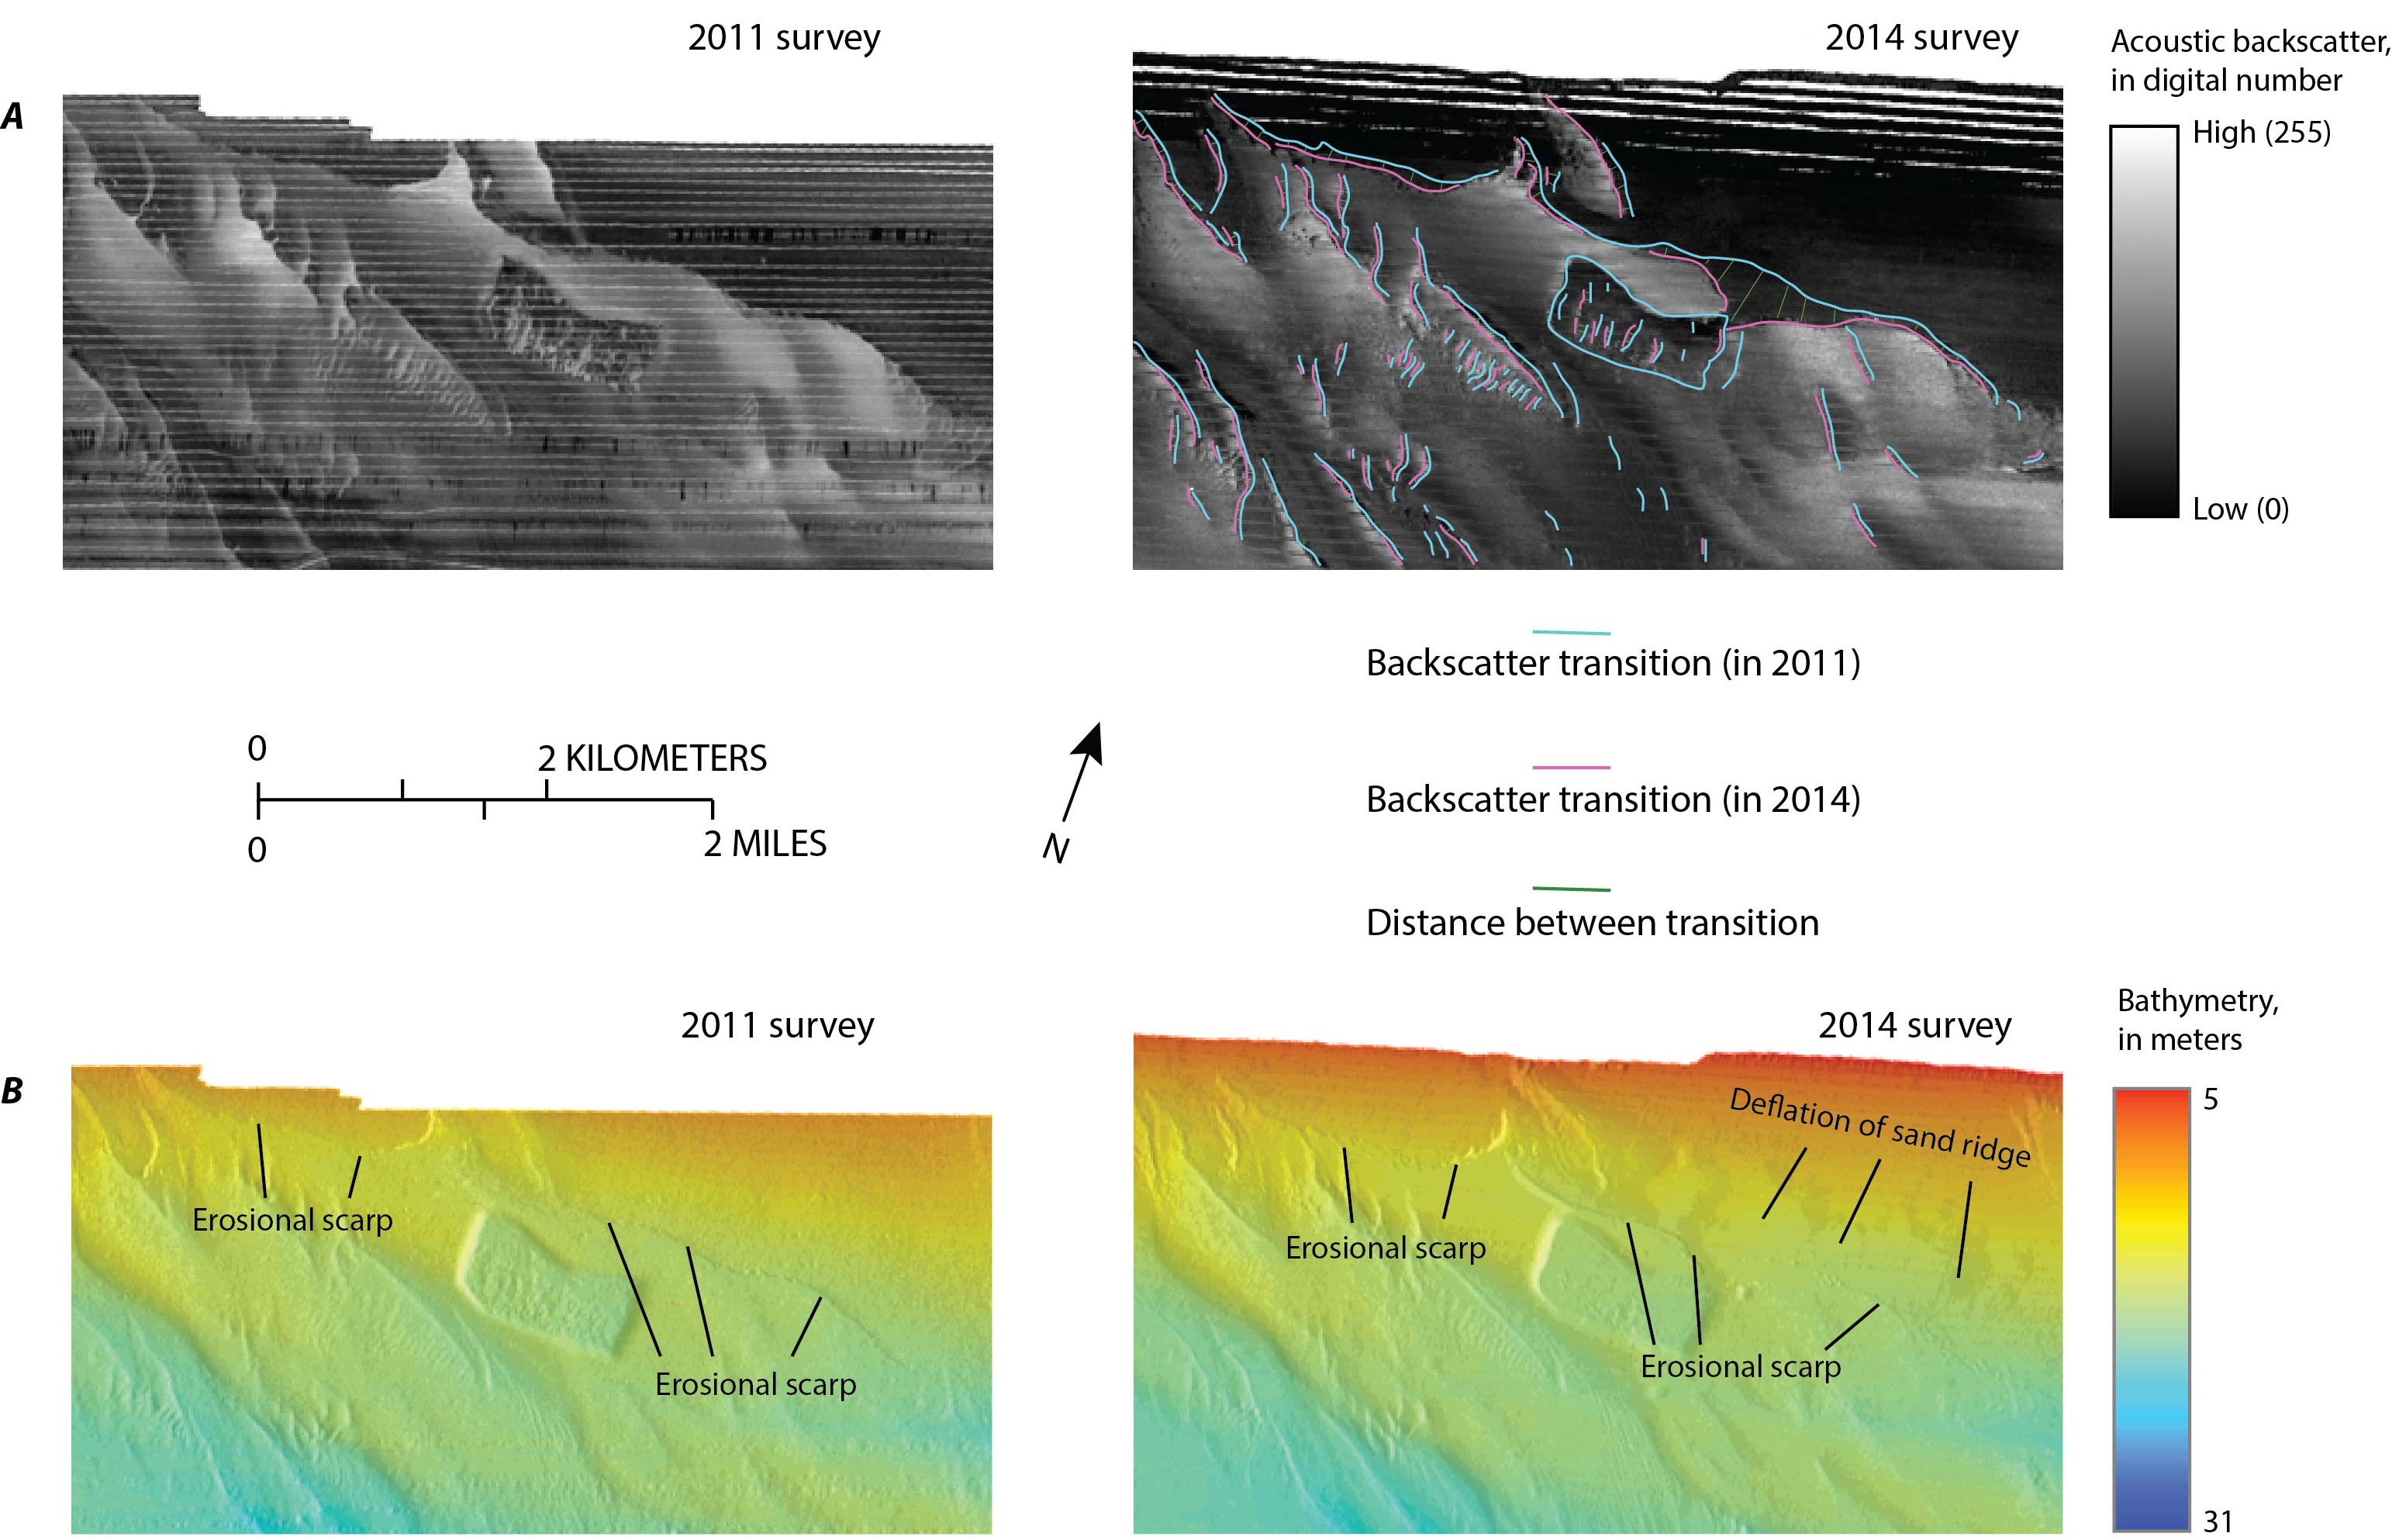 Map showing backscatter and bathymetry collected in 2011 and 2014 offshore of Fire Island, New York. Sharp transitions between areas of high and low backscatter identified alon ghte margins of discrete sediment distribution patterns, bedforms and sediment structures from the 2011 and 2014 surveys are overlain on the backscatter data from 2014 survey.